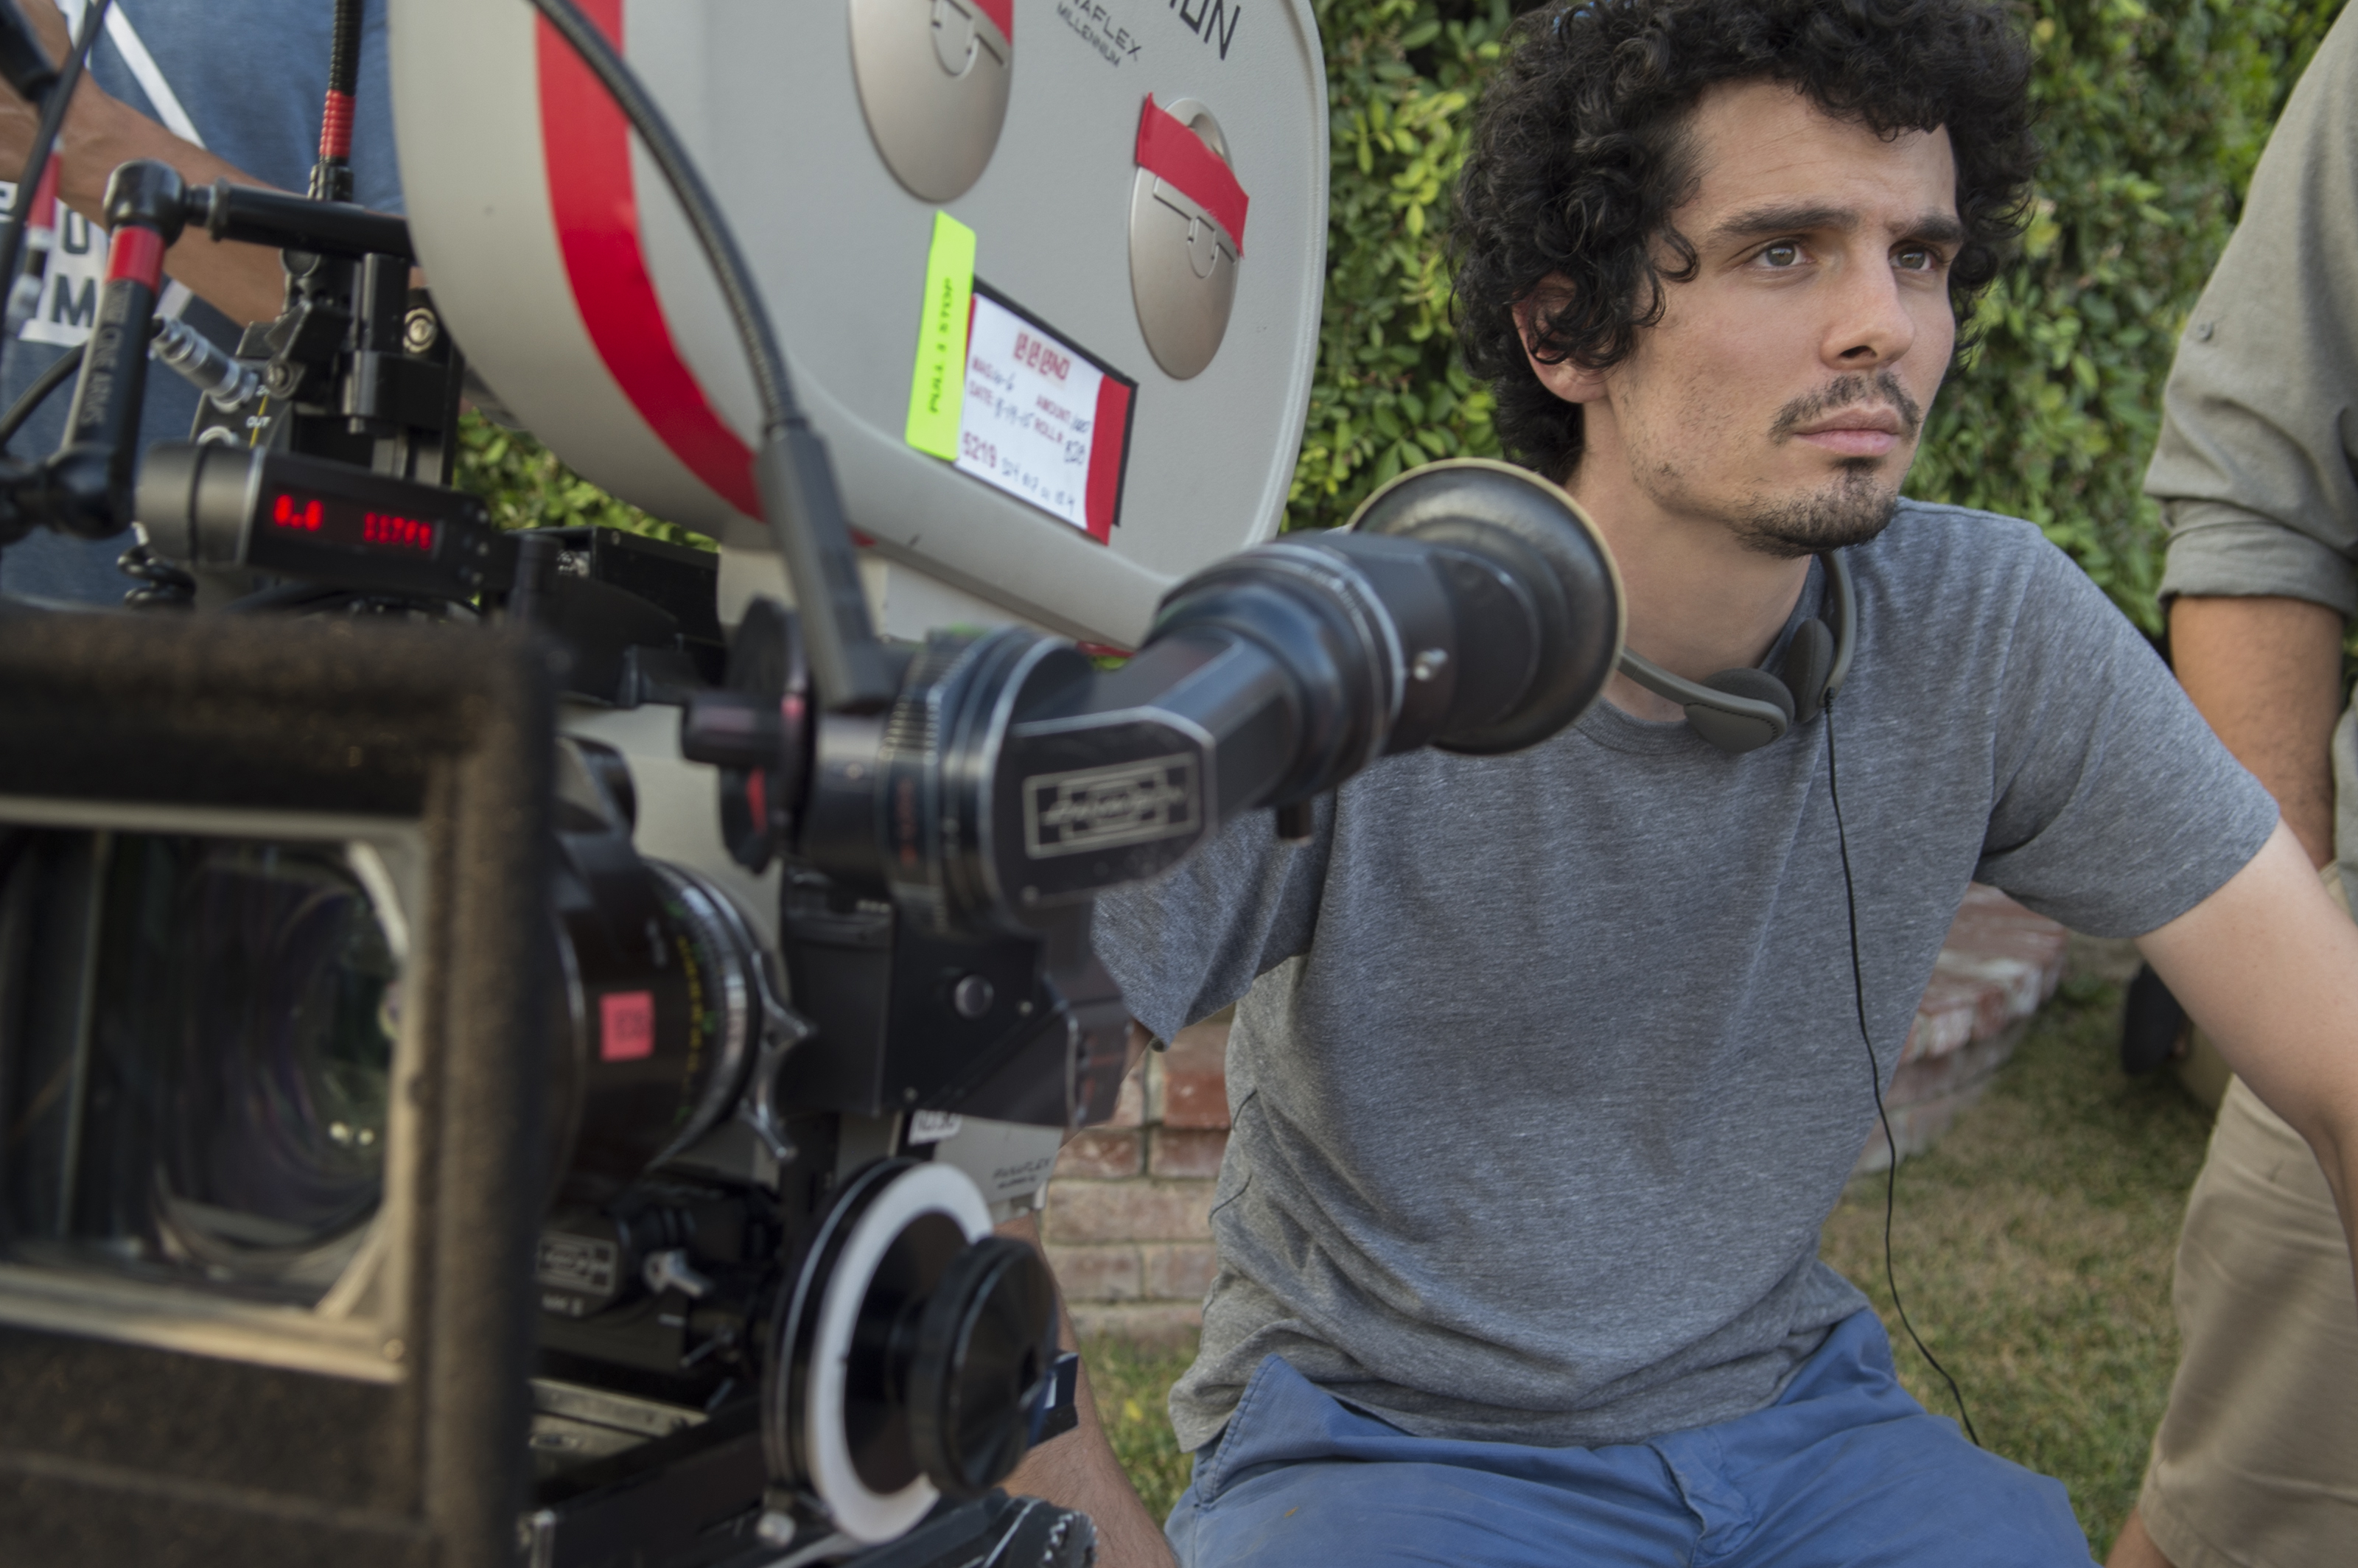 Damien Chazelle to produce new musical series on Netflix